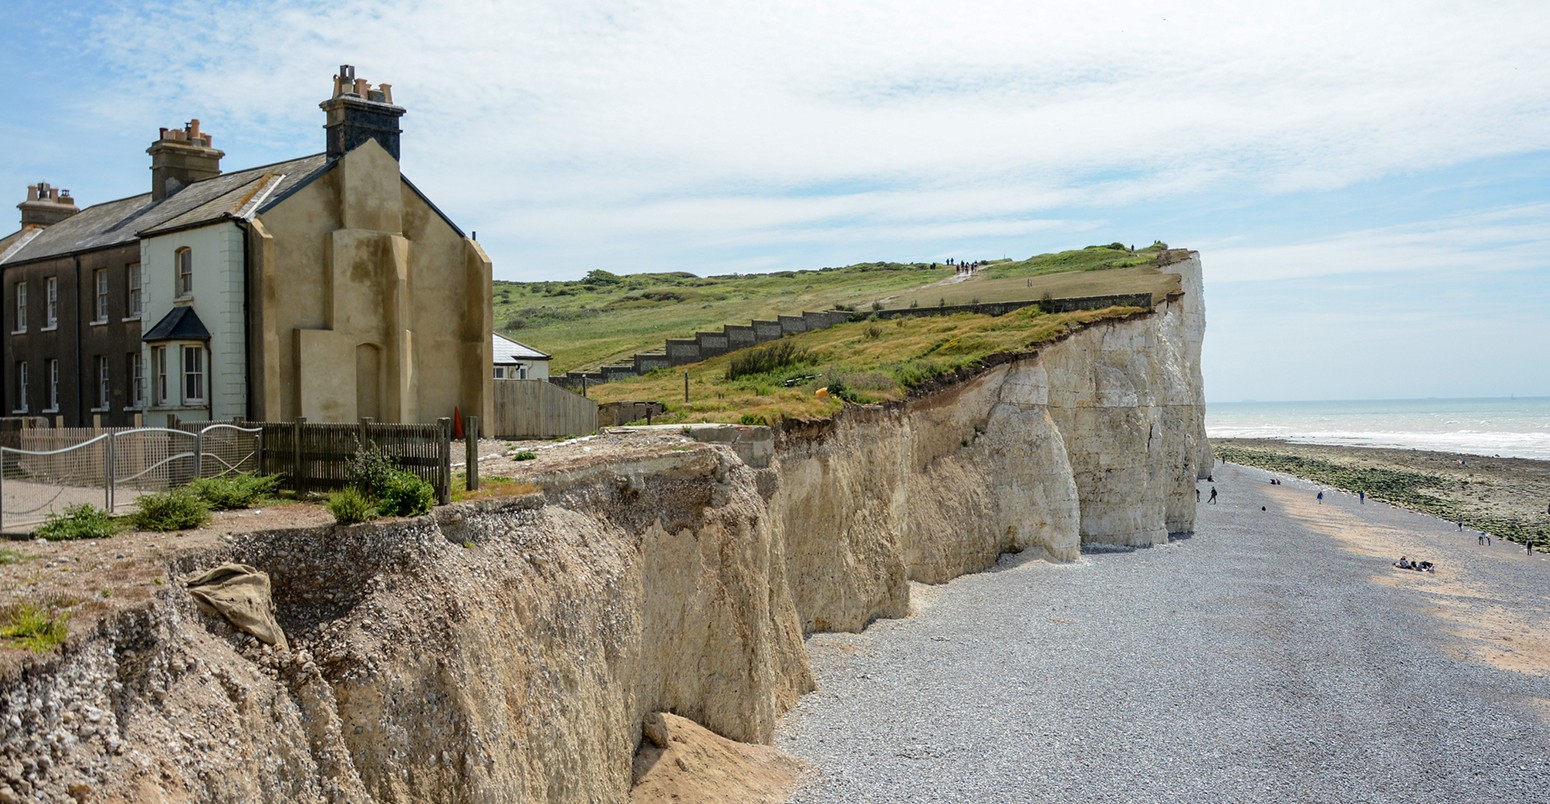 The cliffs being eroded at the Birling Gap. The houses on the cliff are long empty and uninhabited.